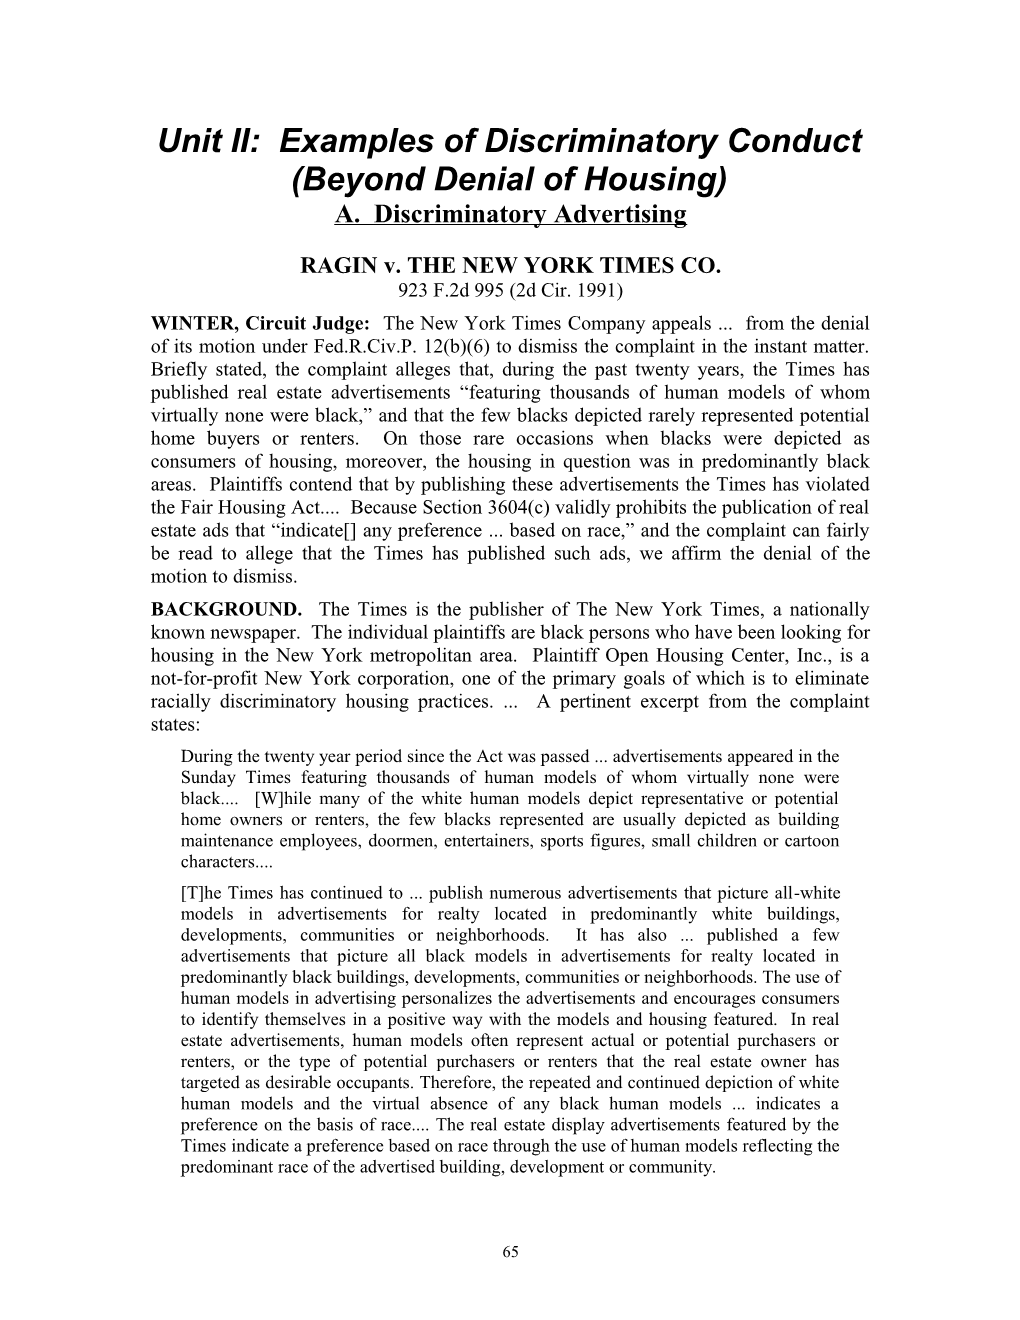 Unit II: Examples of Discriminatory Conduct (Beyond Denial of Housing)